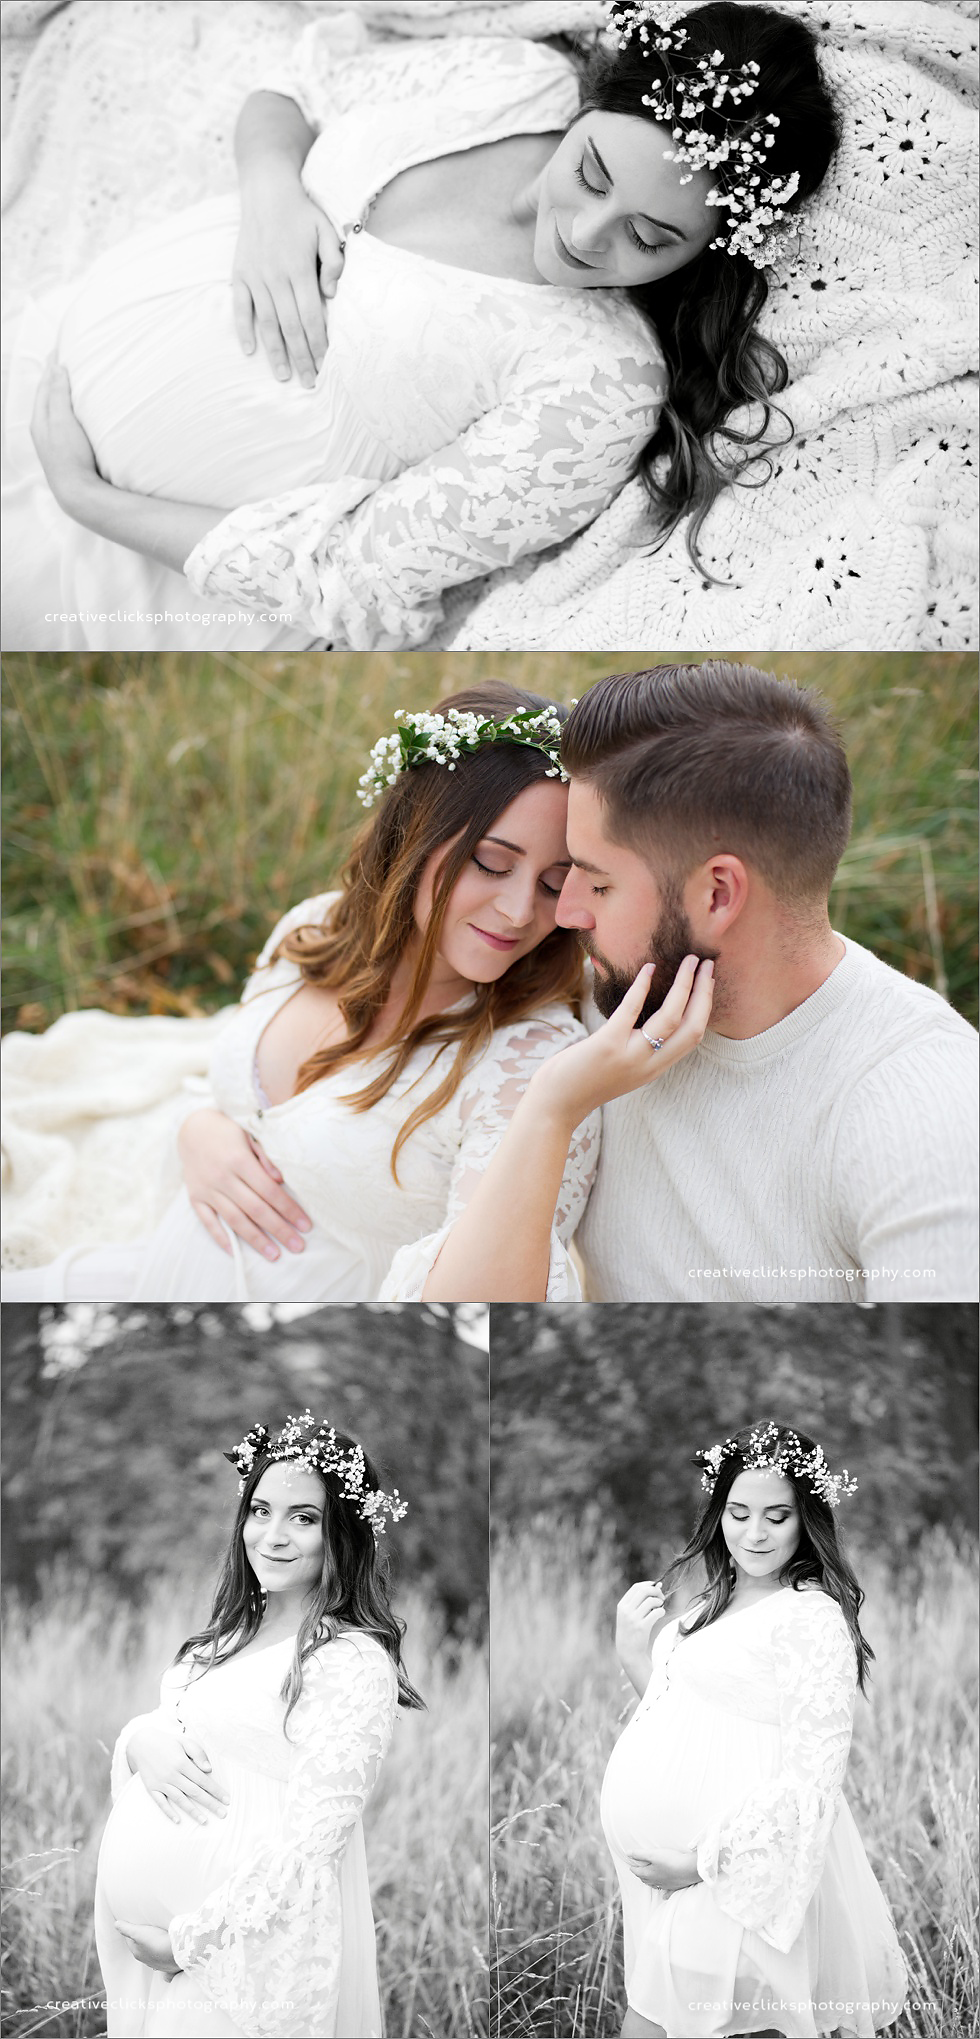 styled maternity session with floral crown